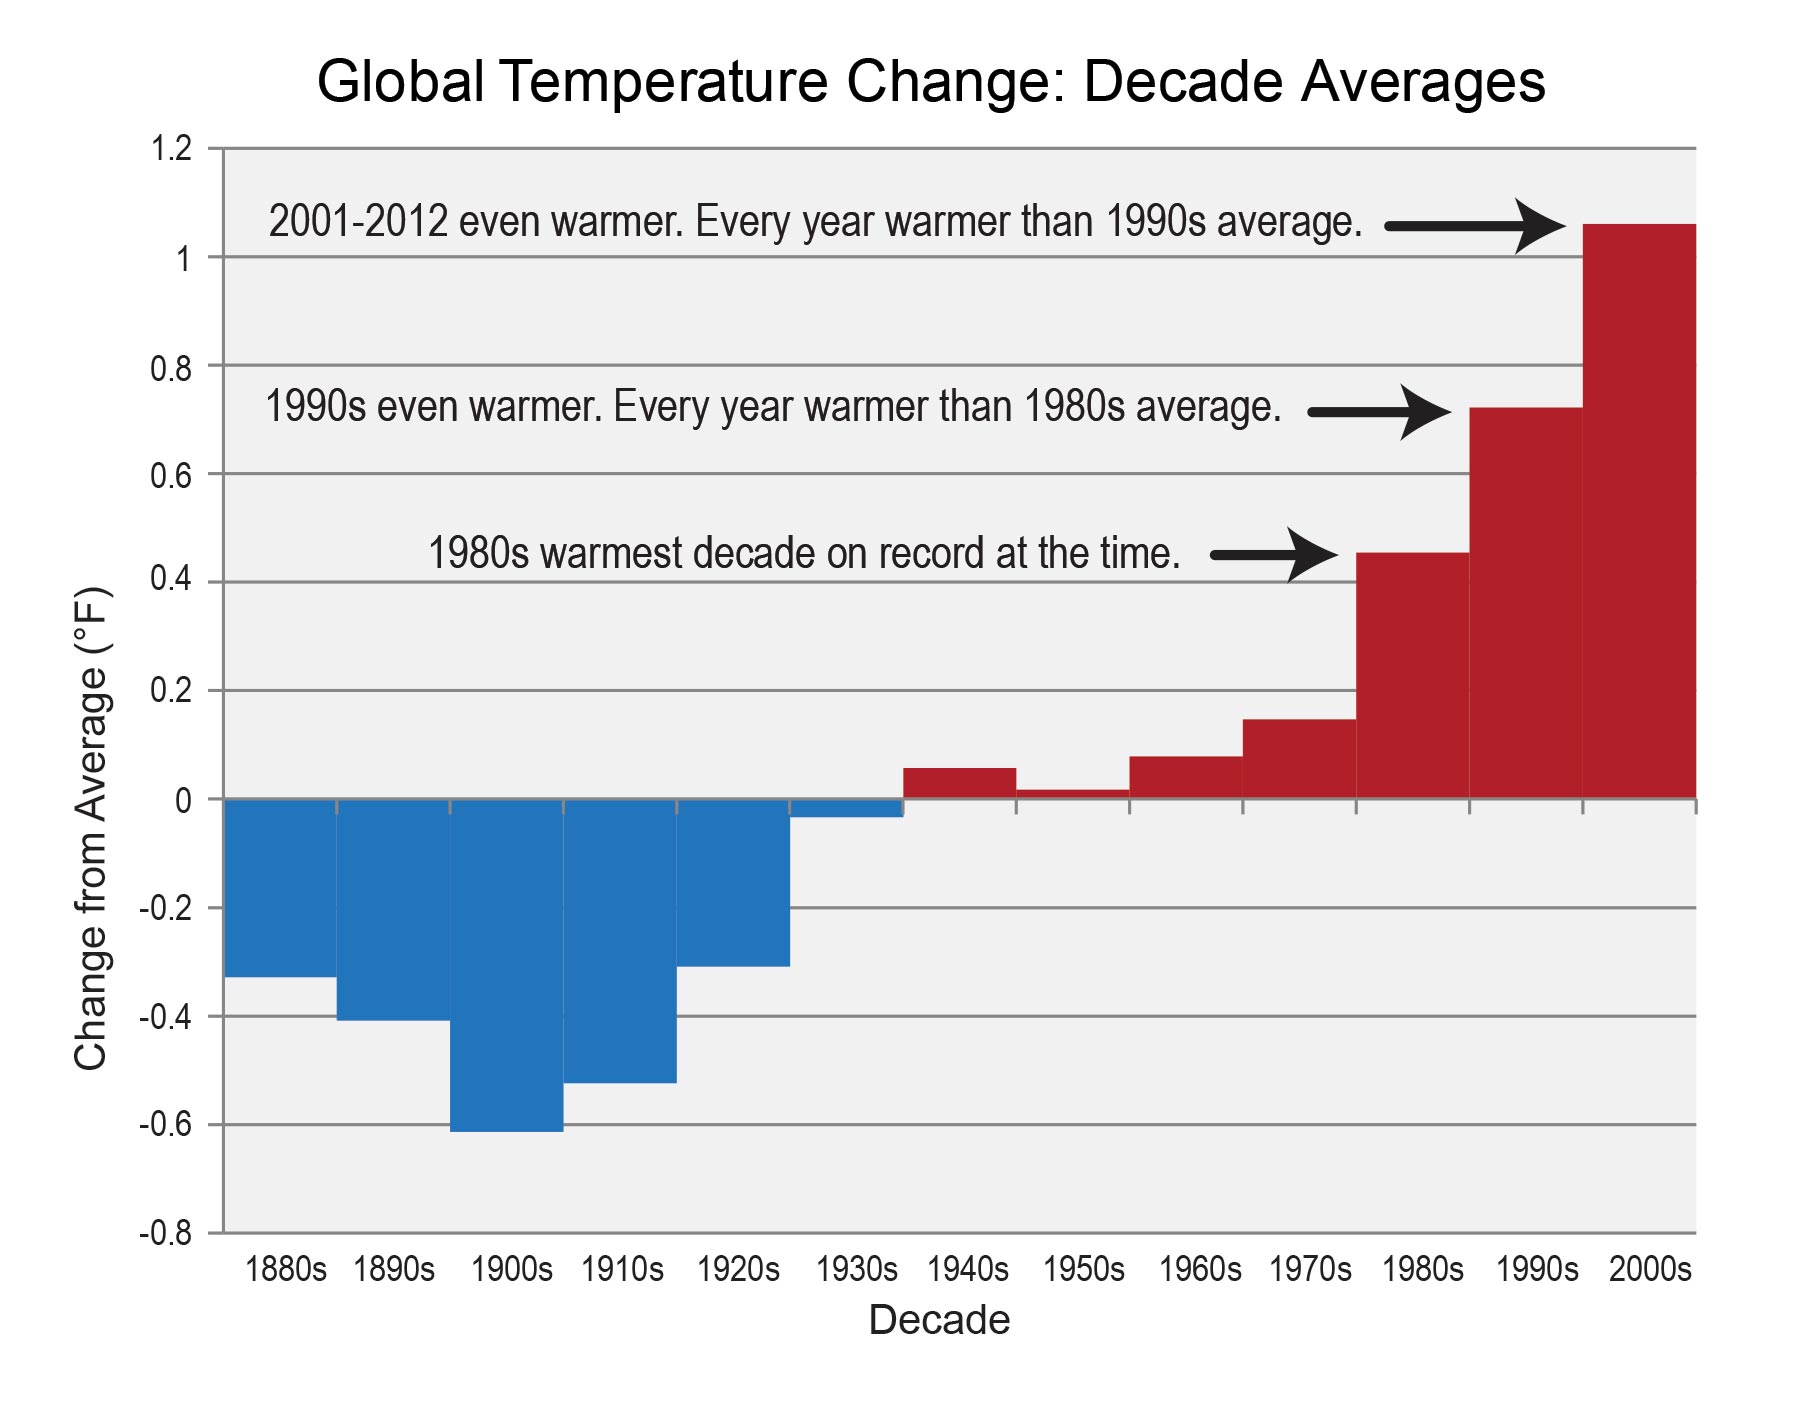 10 New Charts That Will Make You Want To Stop Global Warming